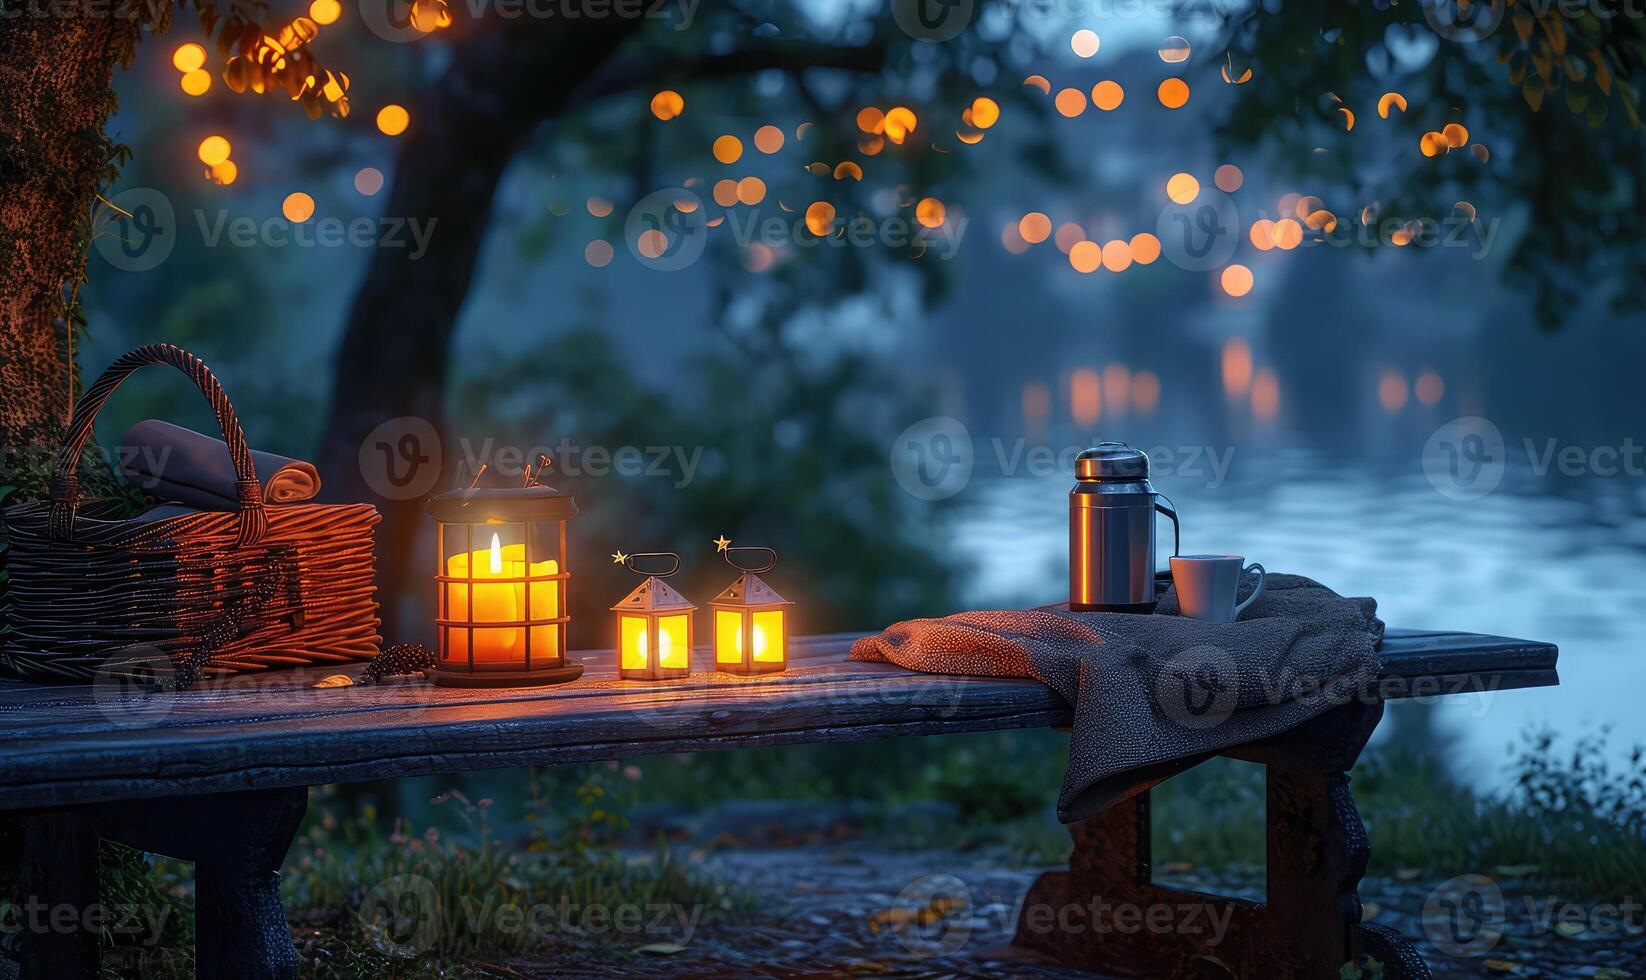 AI generated Take summer photos after the sun goes down. Park bench, candles, picnic basket, beautiful scenery